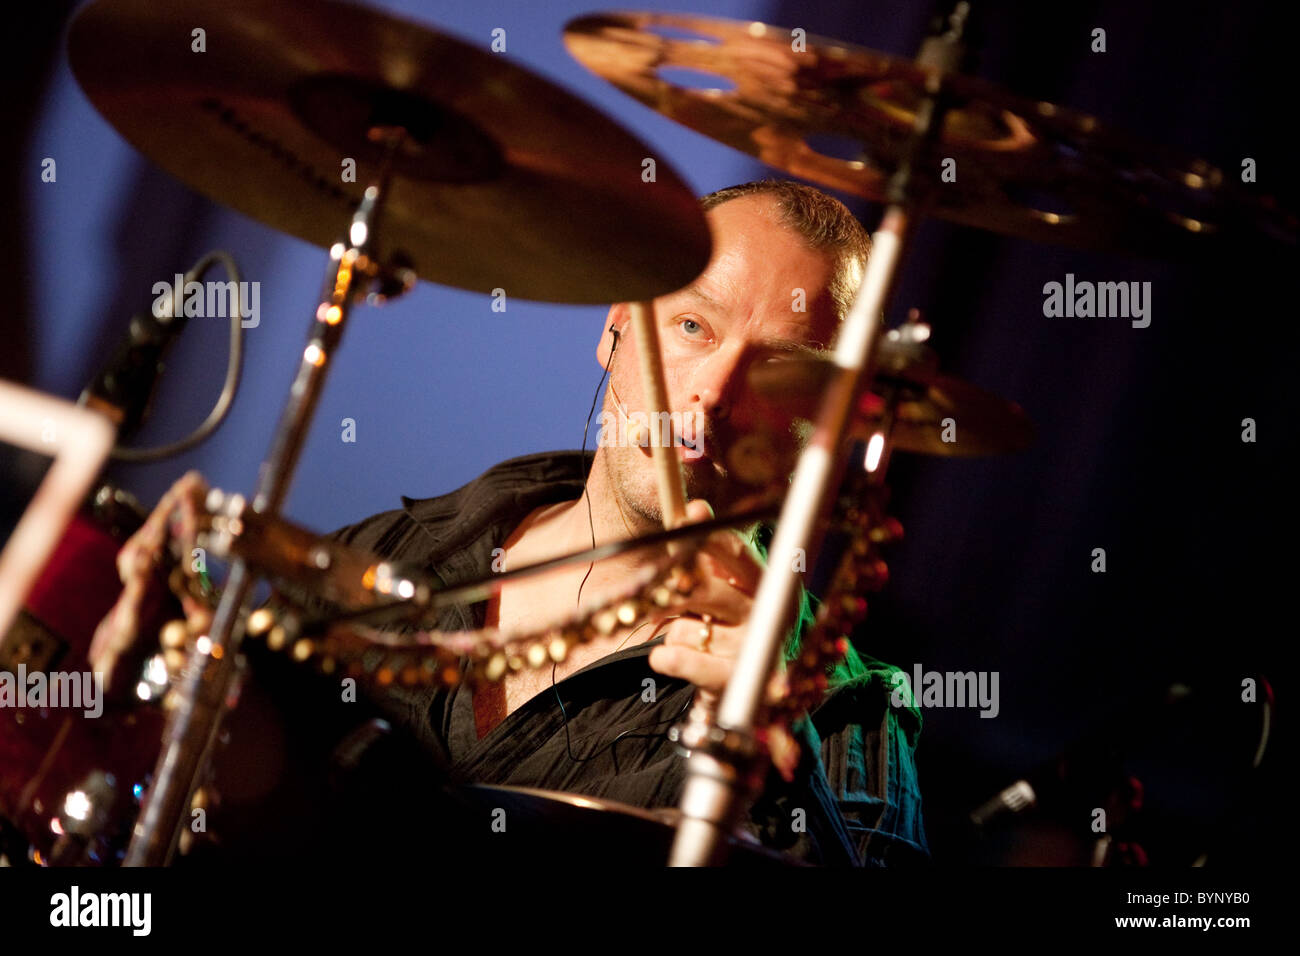 The drummer Frank van Essen with the Celtic Rock band Iona, playing drums in concert, the UK 2010 Stock Photo